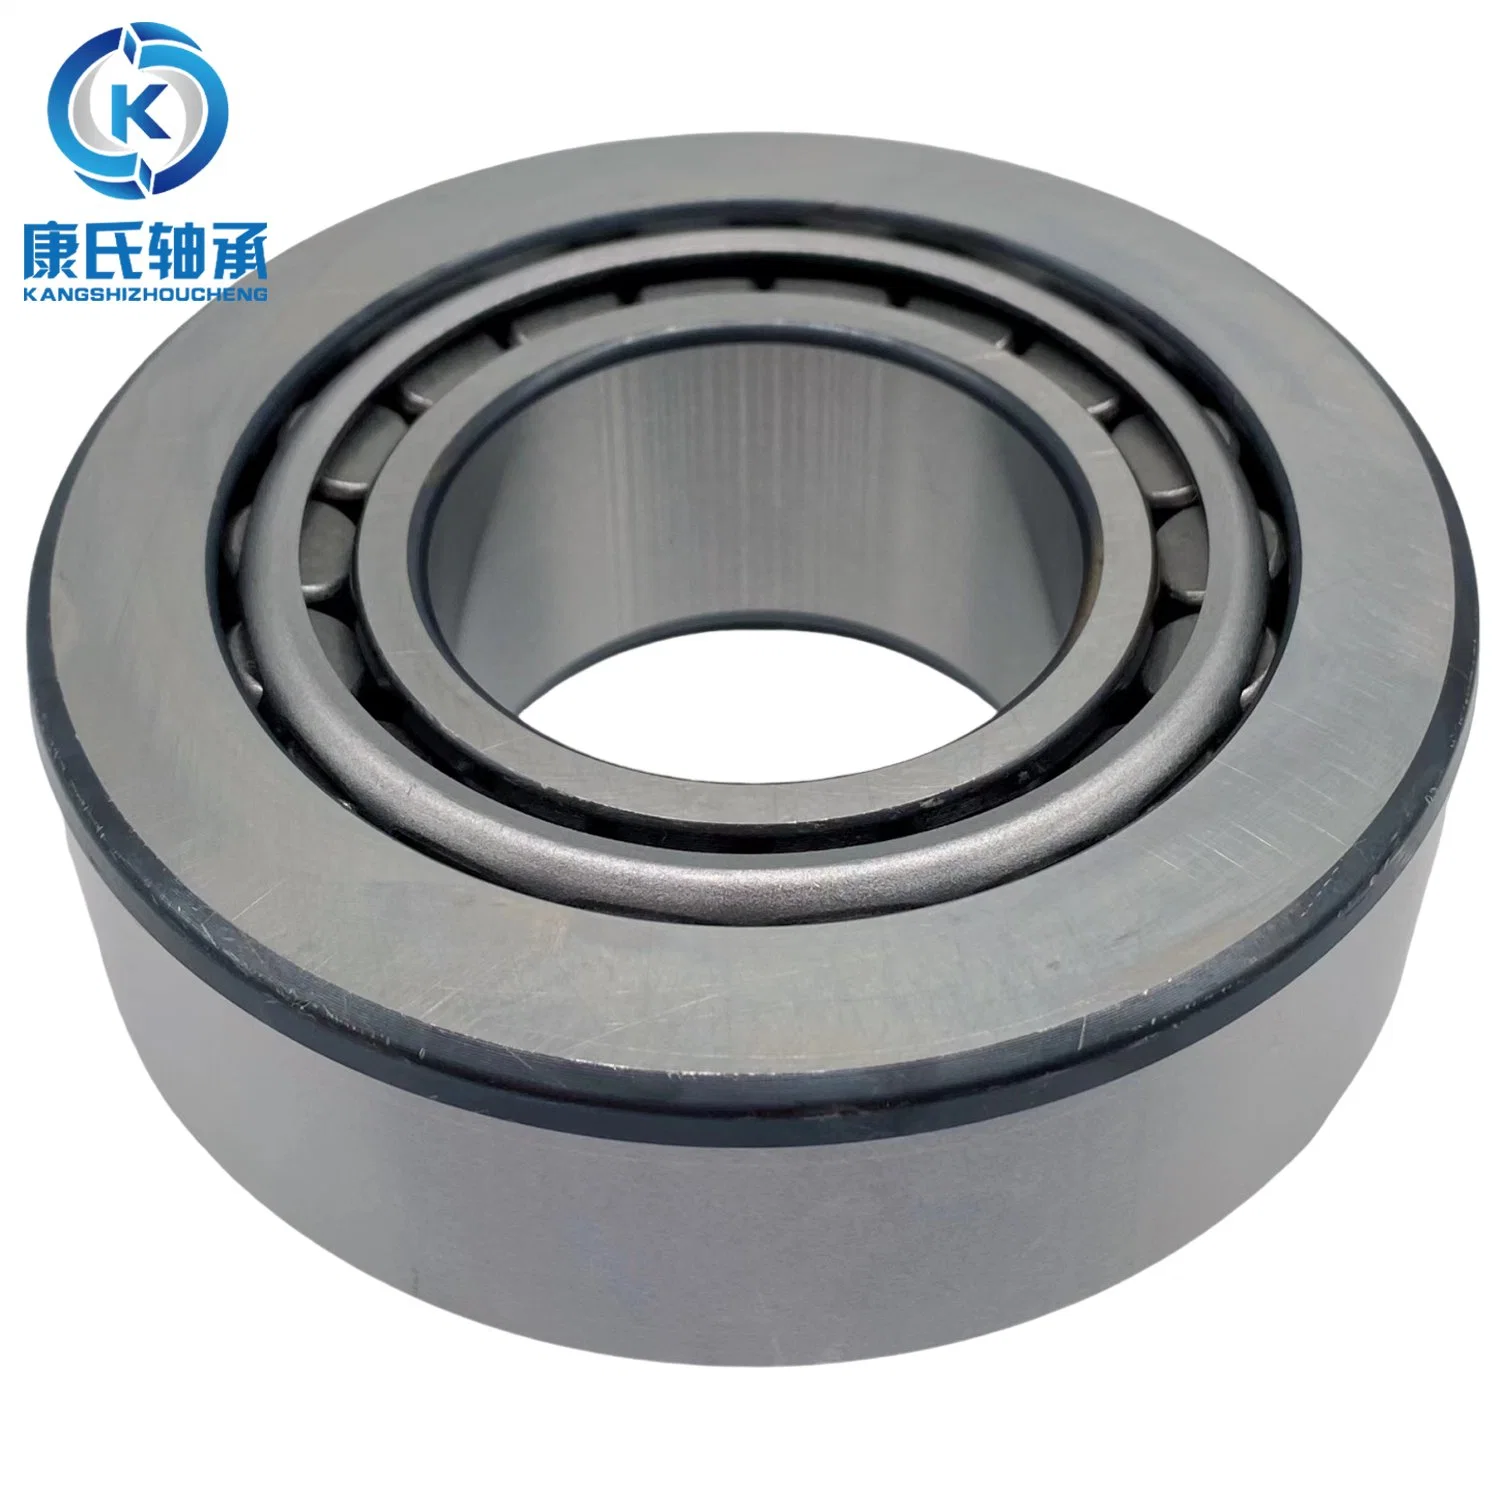 Motorcycle Spare Part Tapered Roller Bearing for Conveyor Printing Press Motorcycle Parts Motorcycle Accessories Automobile Parts Auto Spare Part